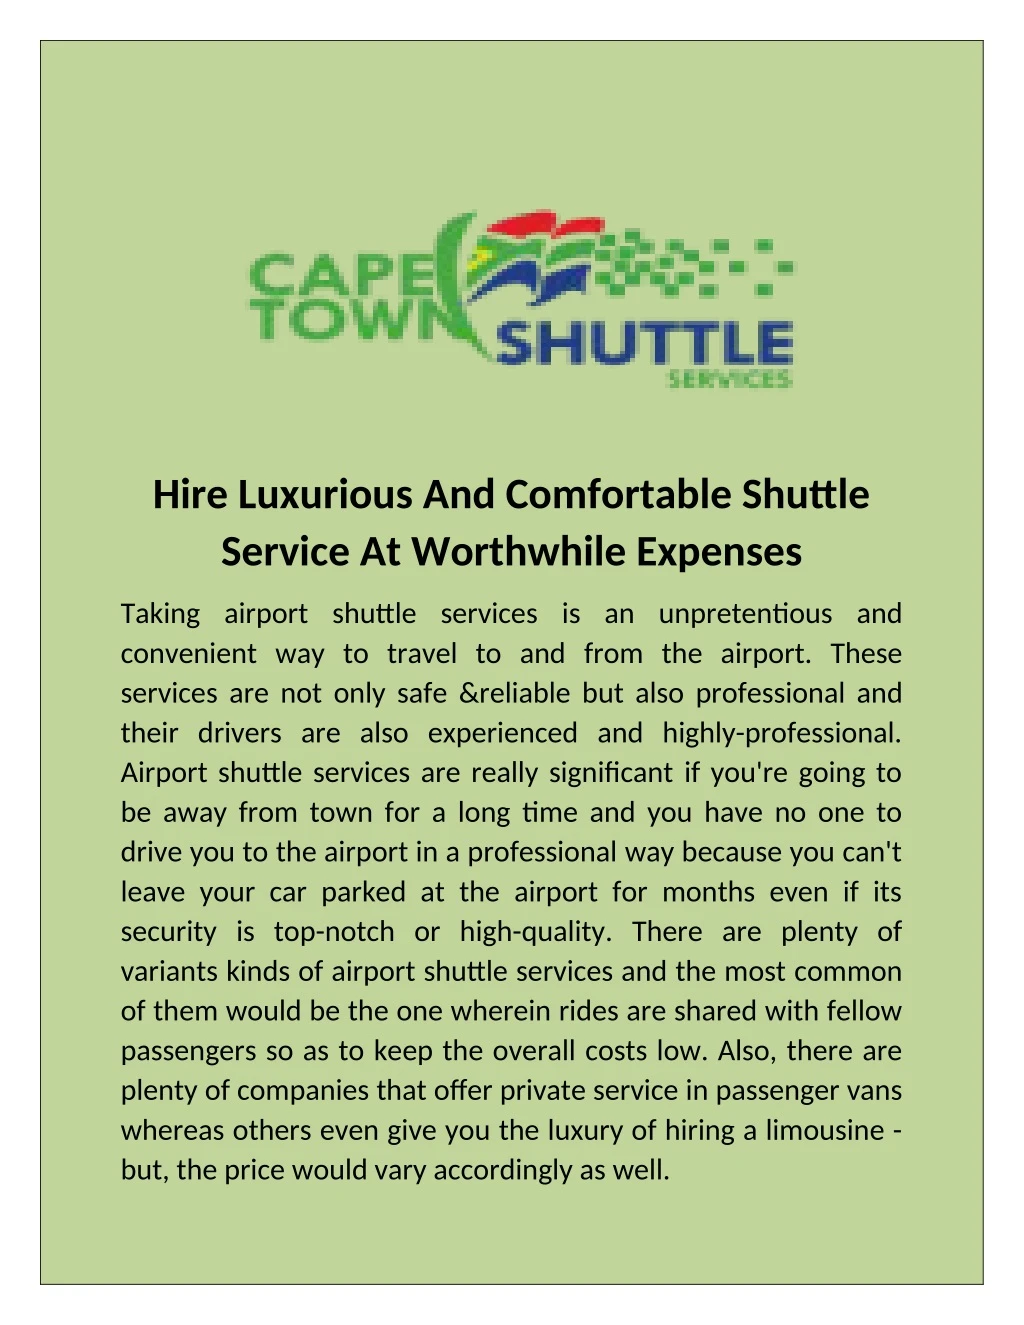 hire luxurious and comfortable shuttle service n.